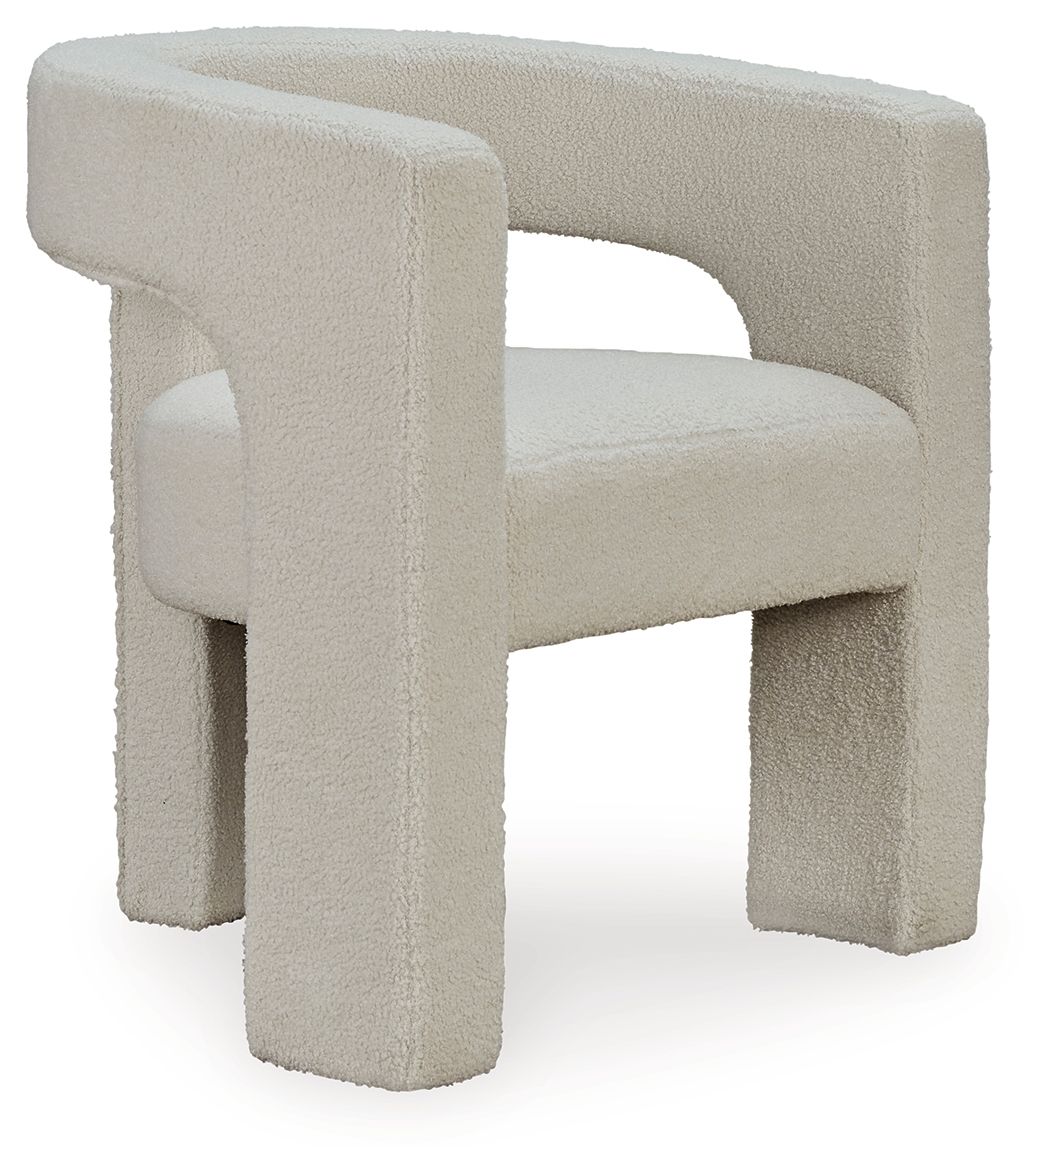 Landick - Accent Chair - Tony's Home Furnishings